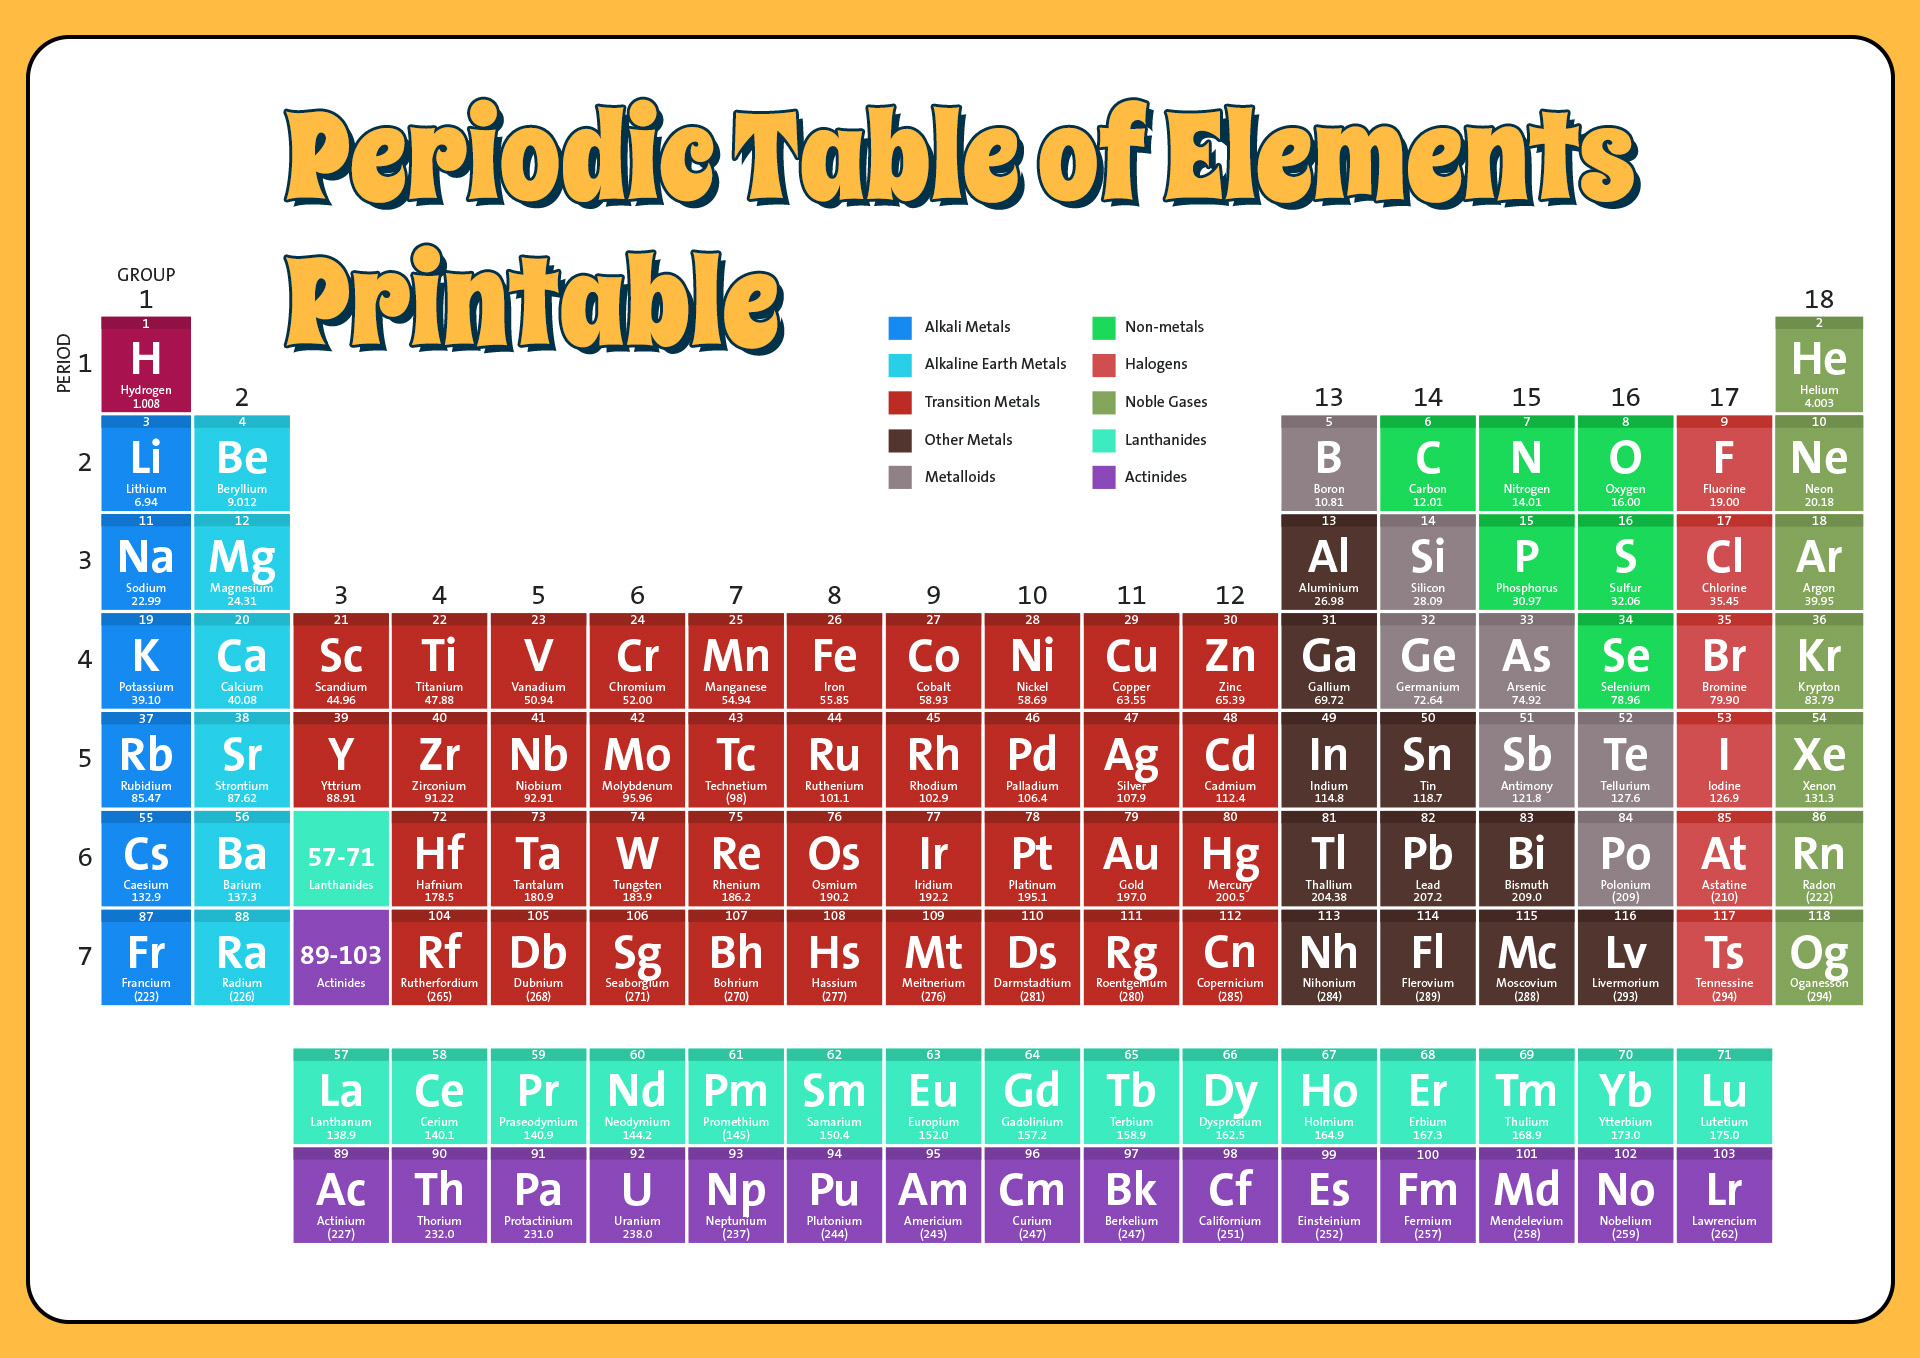 Periodic Table of Elements Printable PDF Image